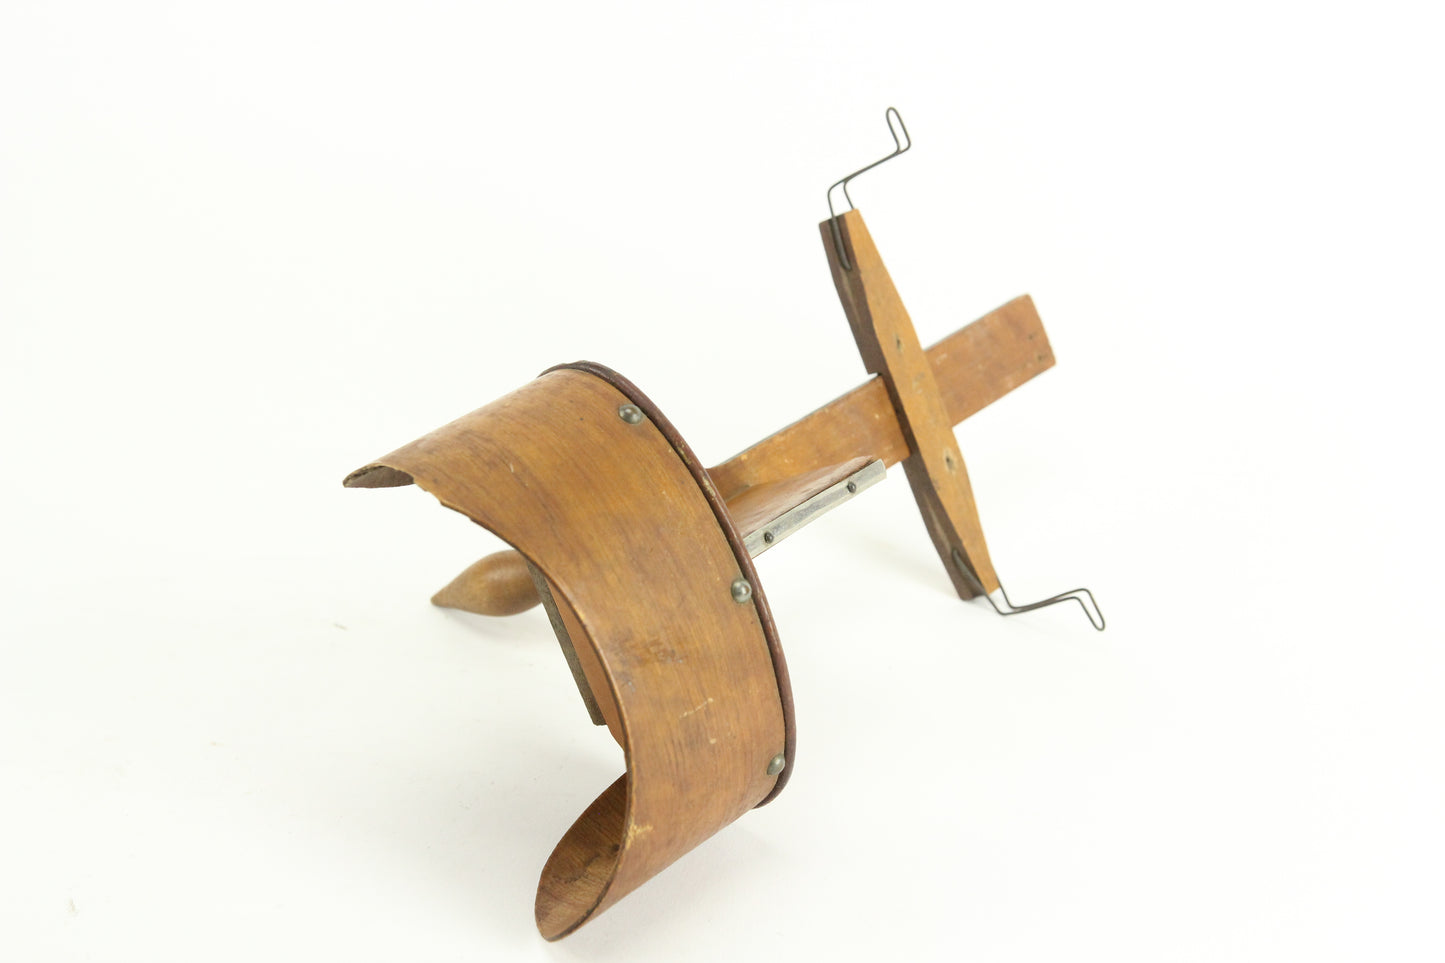 Stereoscope 3D Viewfinder Stereo Card Viewer, Patented June 29, 1874